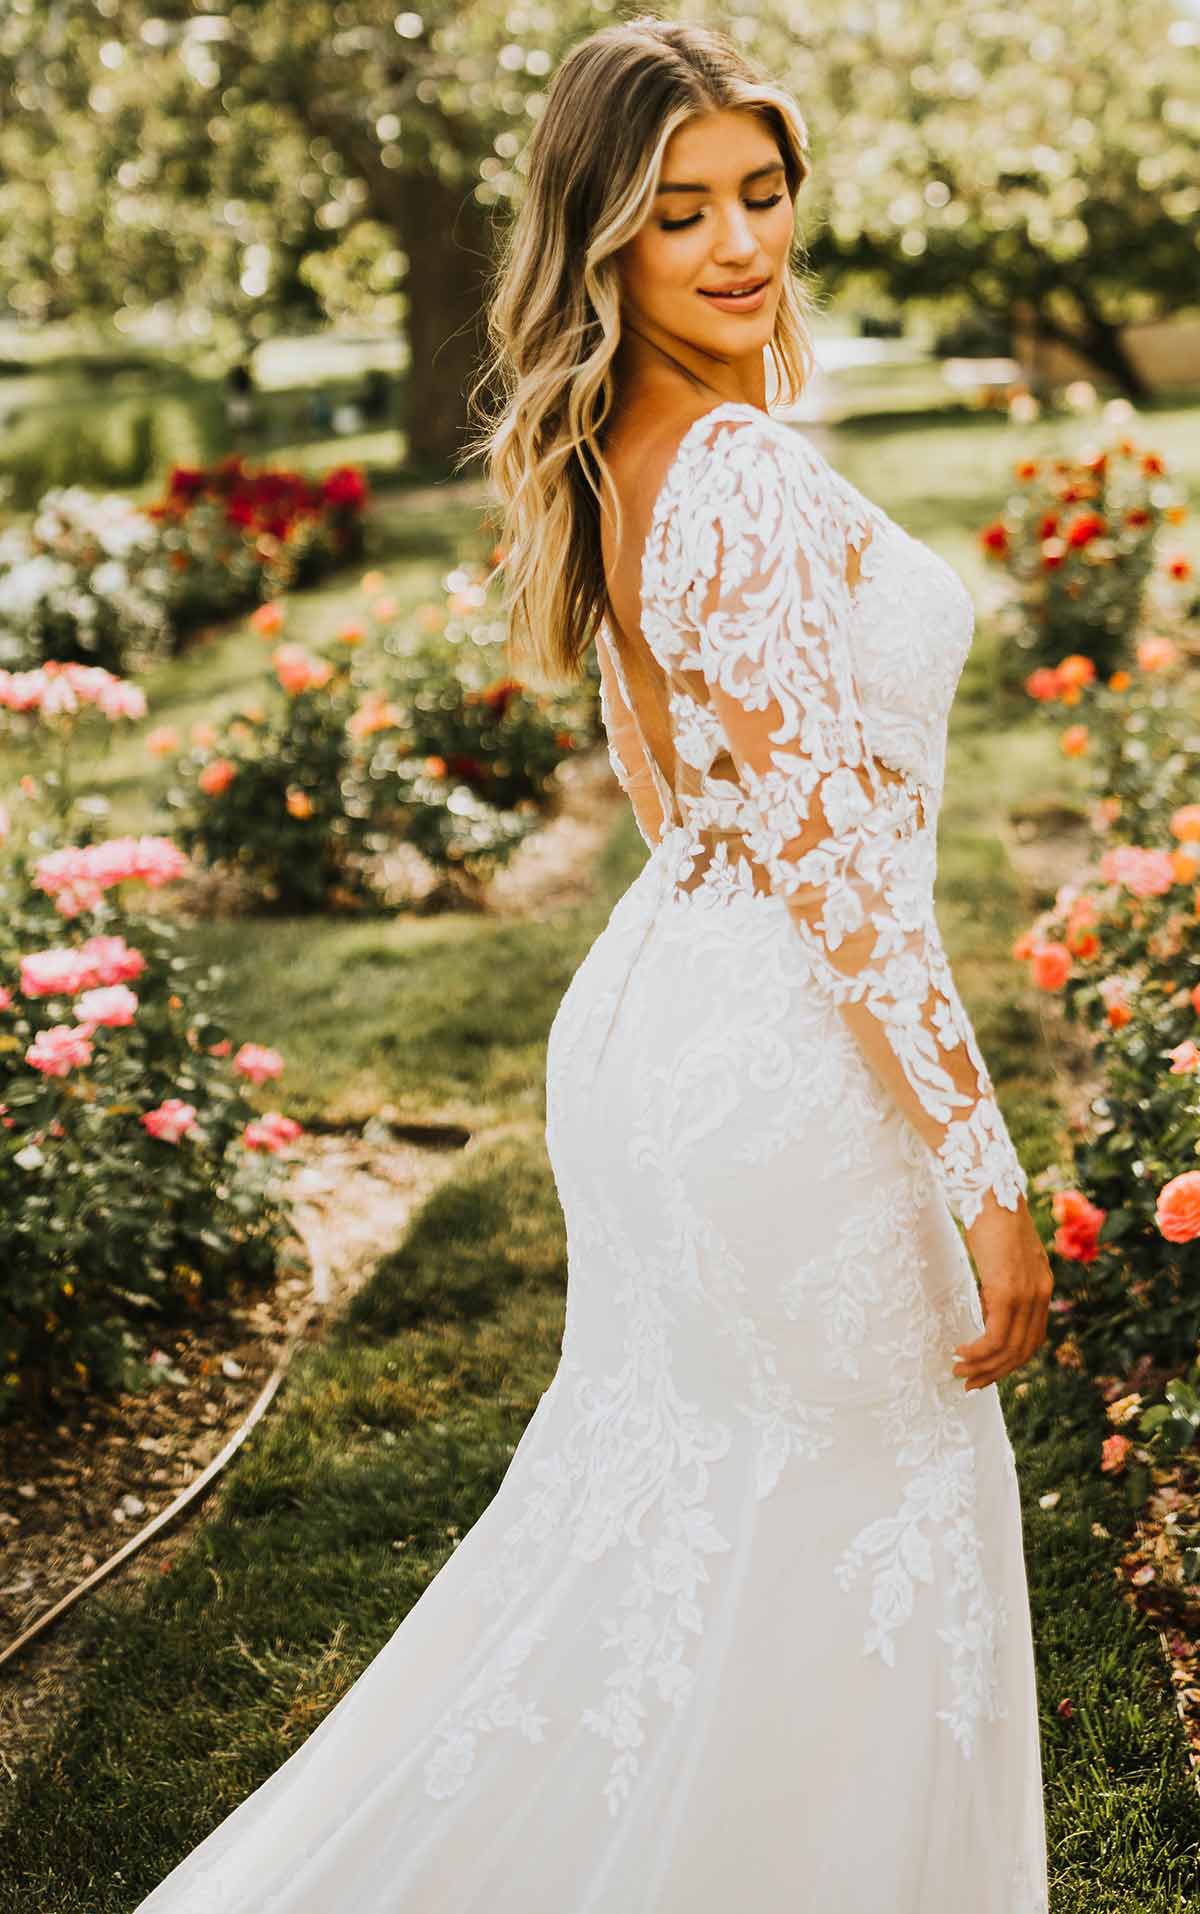 7420 - Sexy Long-Sleeve Lace Wedding Dress with Cutouts and Full Train -  Love & Lace Boutique